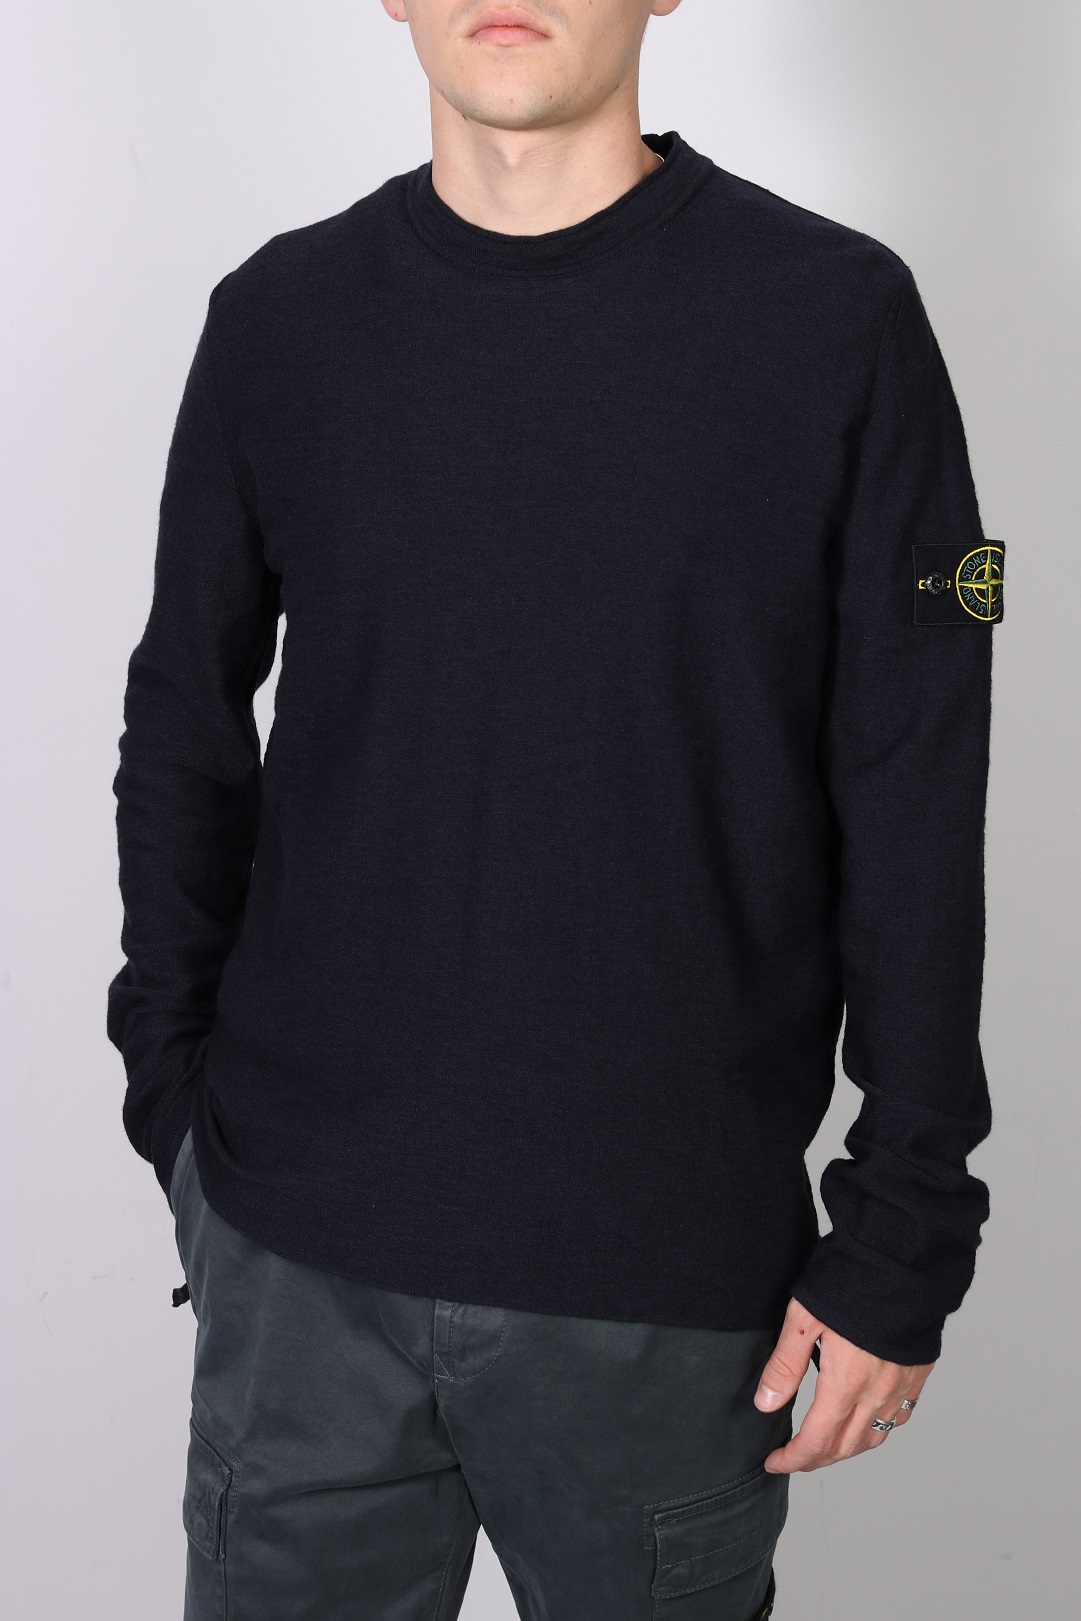 STONE ISLAND Knit Pullover in Navy Blue M